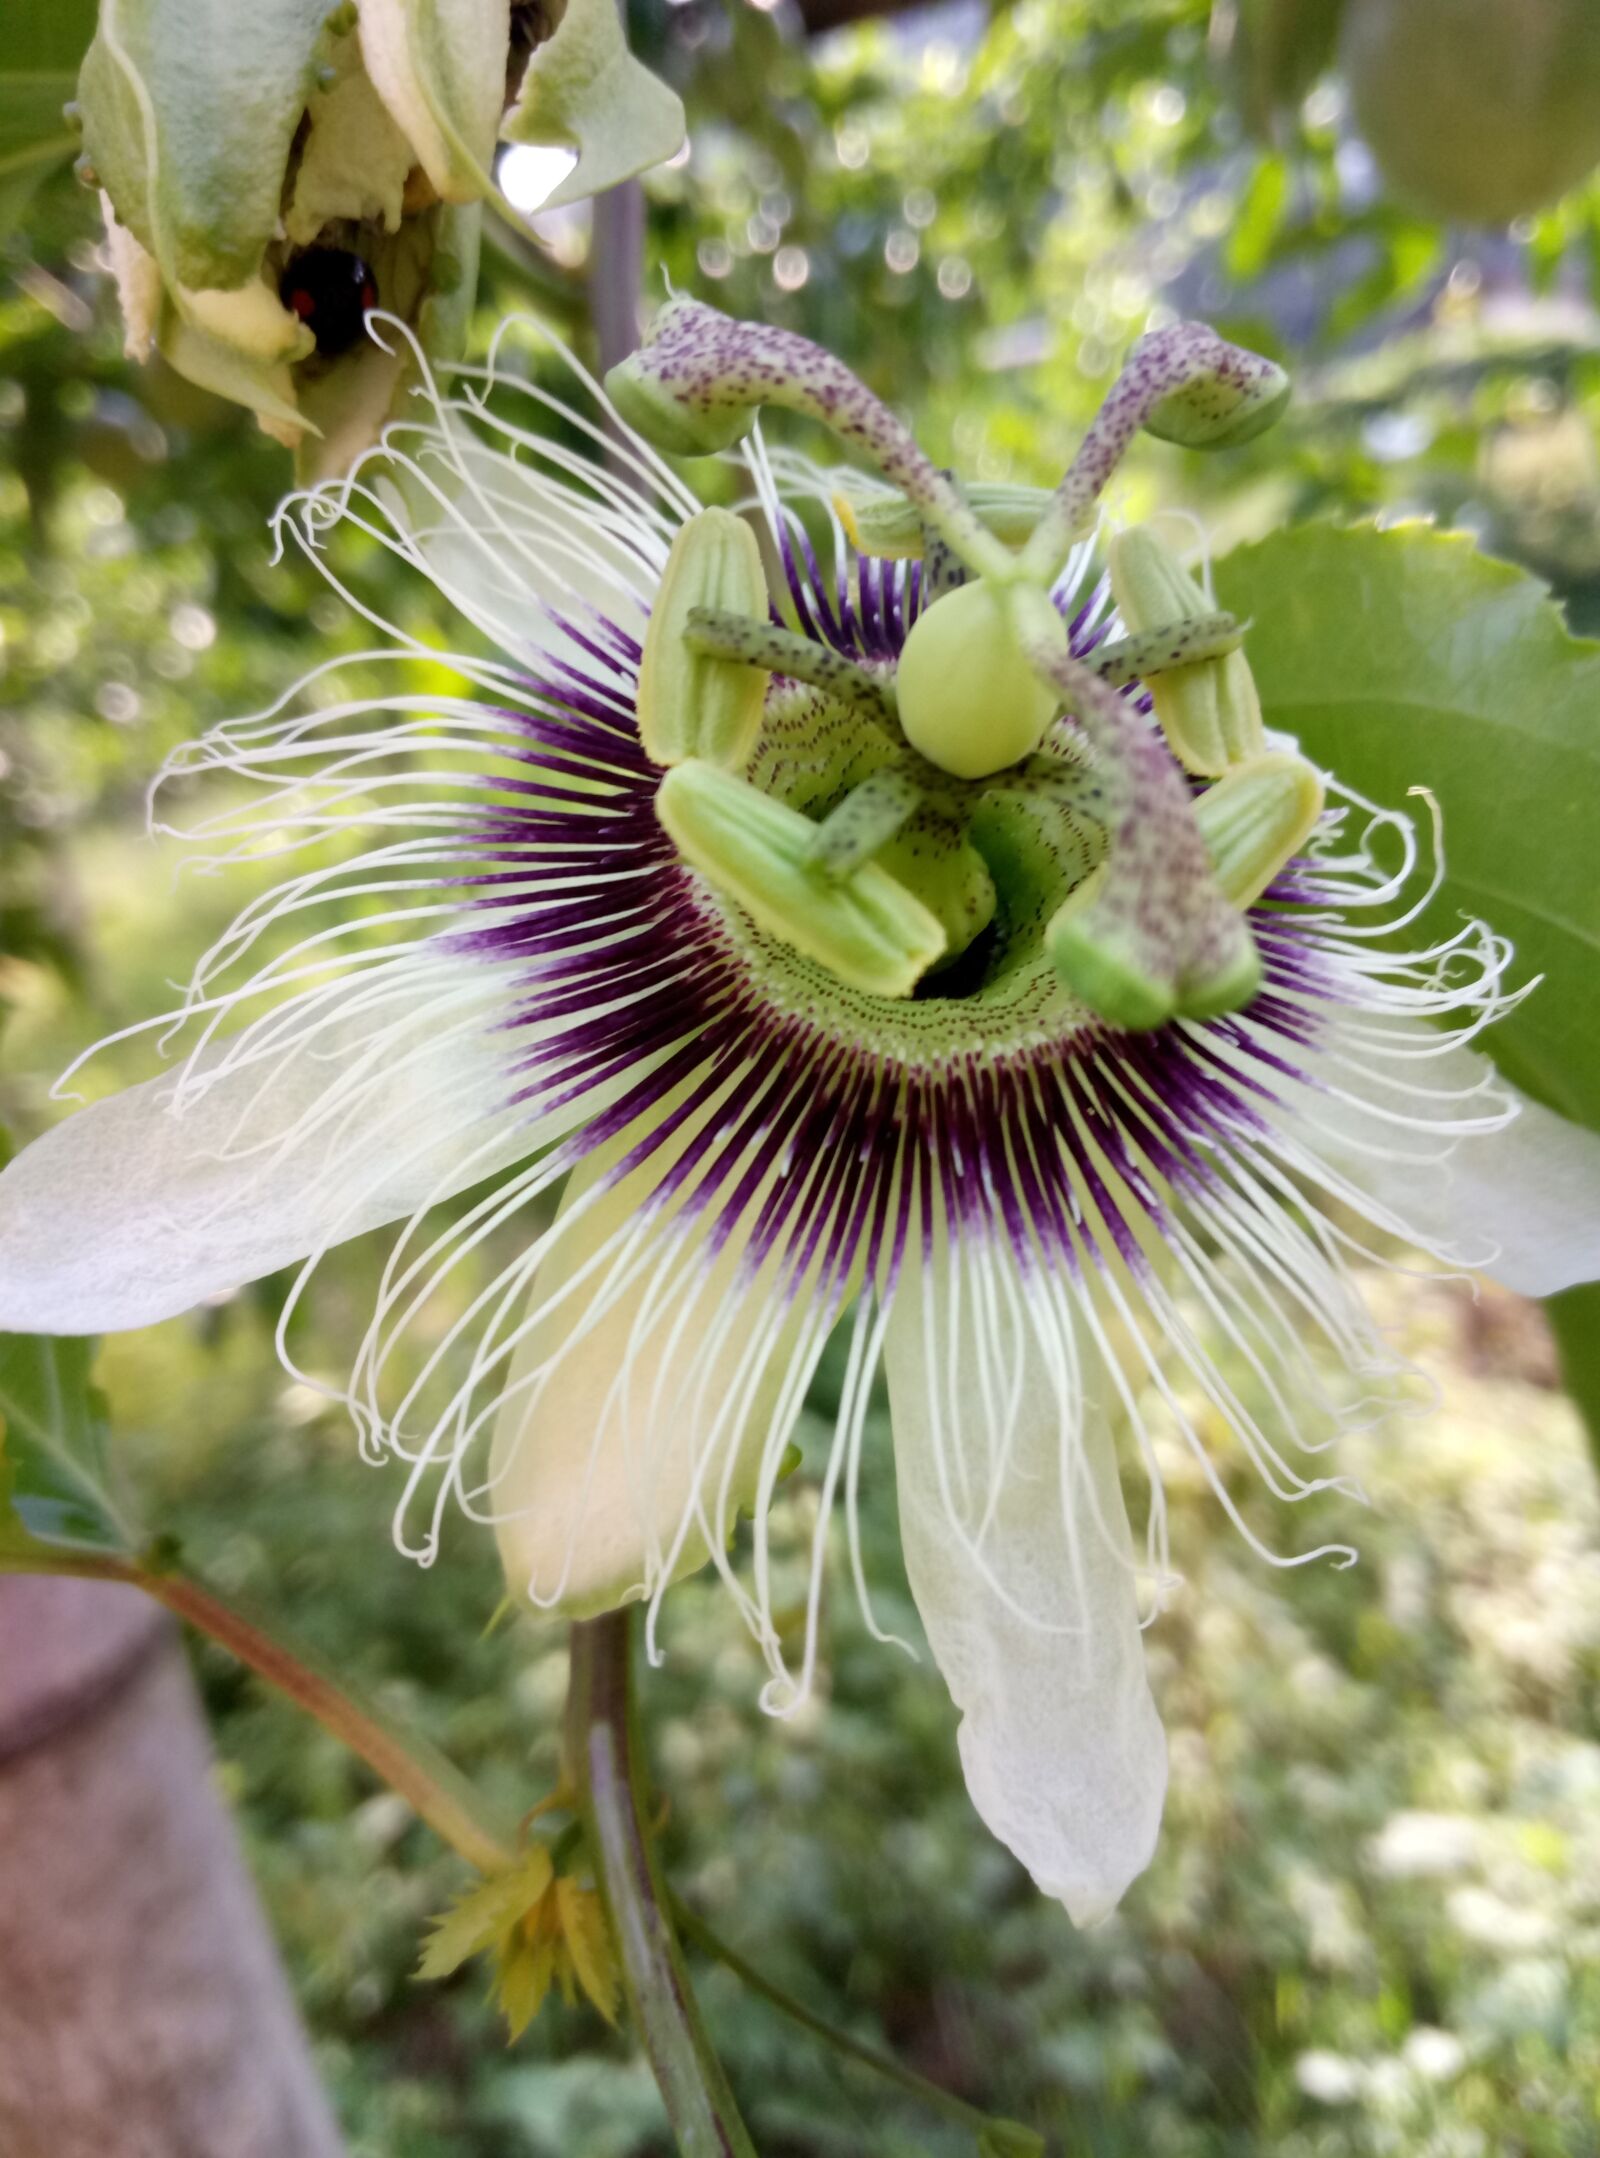 Meizu m3 note sample photo. Flower, passion fruit flower photography